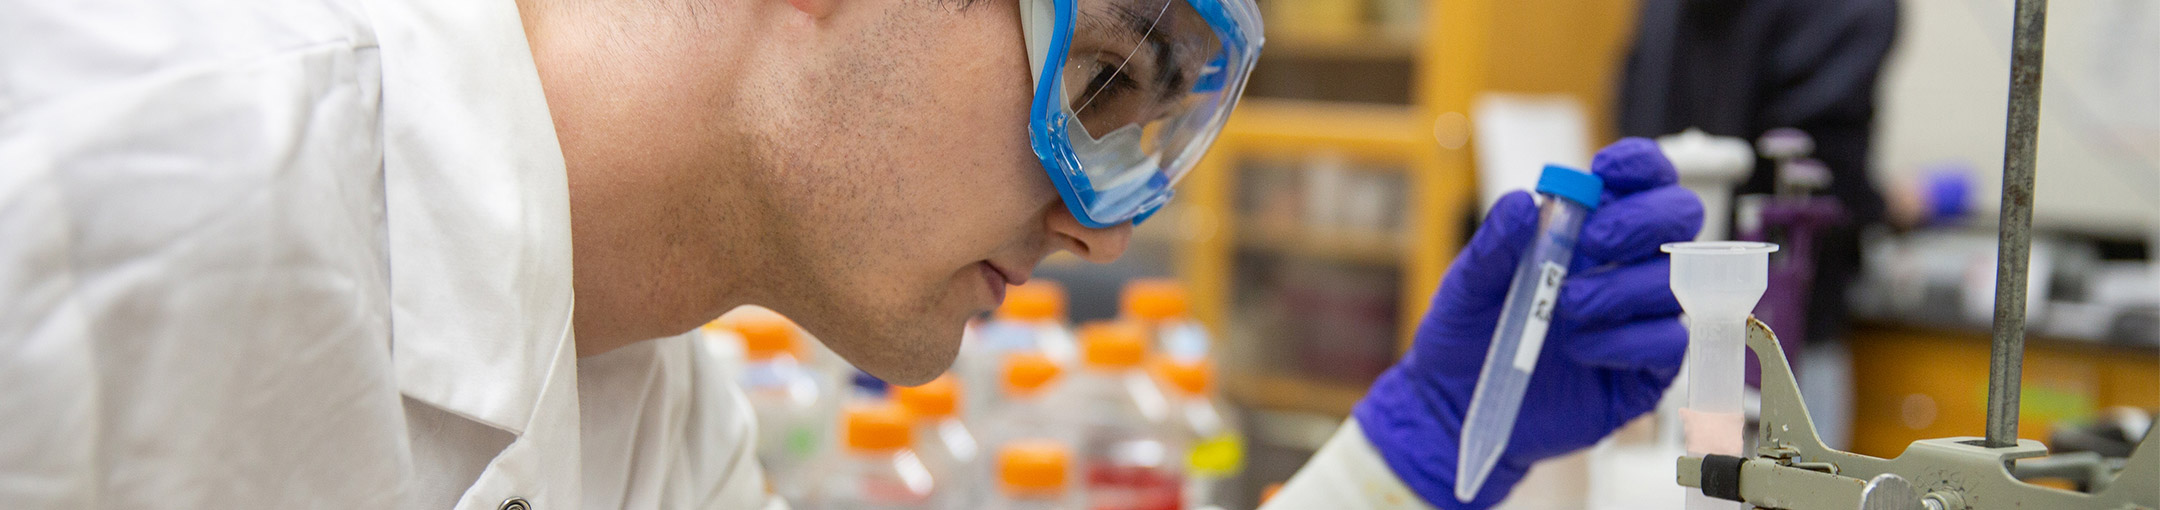 Student looking at a vial in a lab.